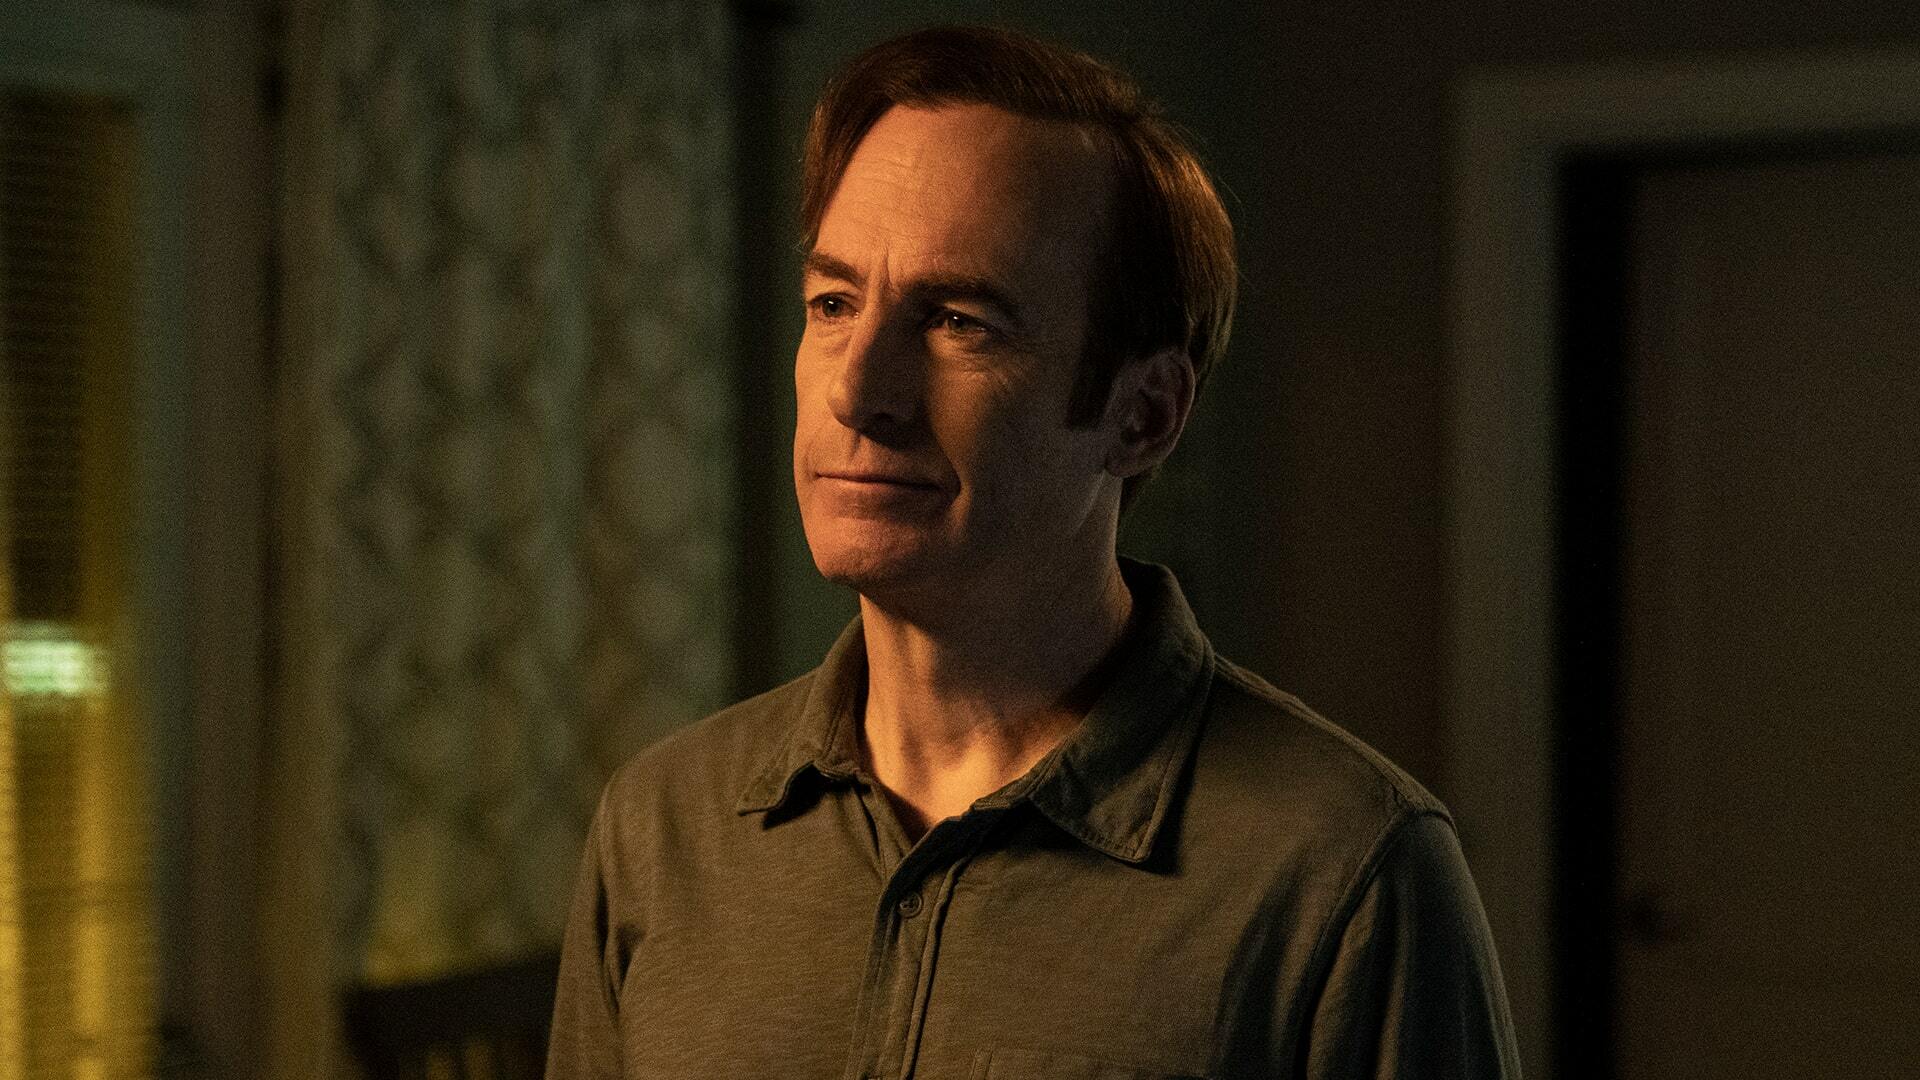 A man (Bob Odenkirk as Jimmy McGill) standing in a dimly lit living room.